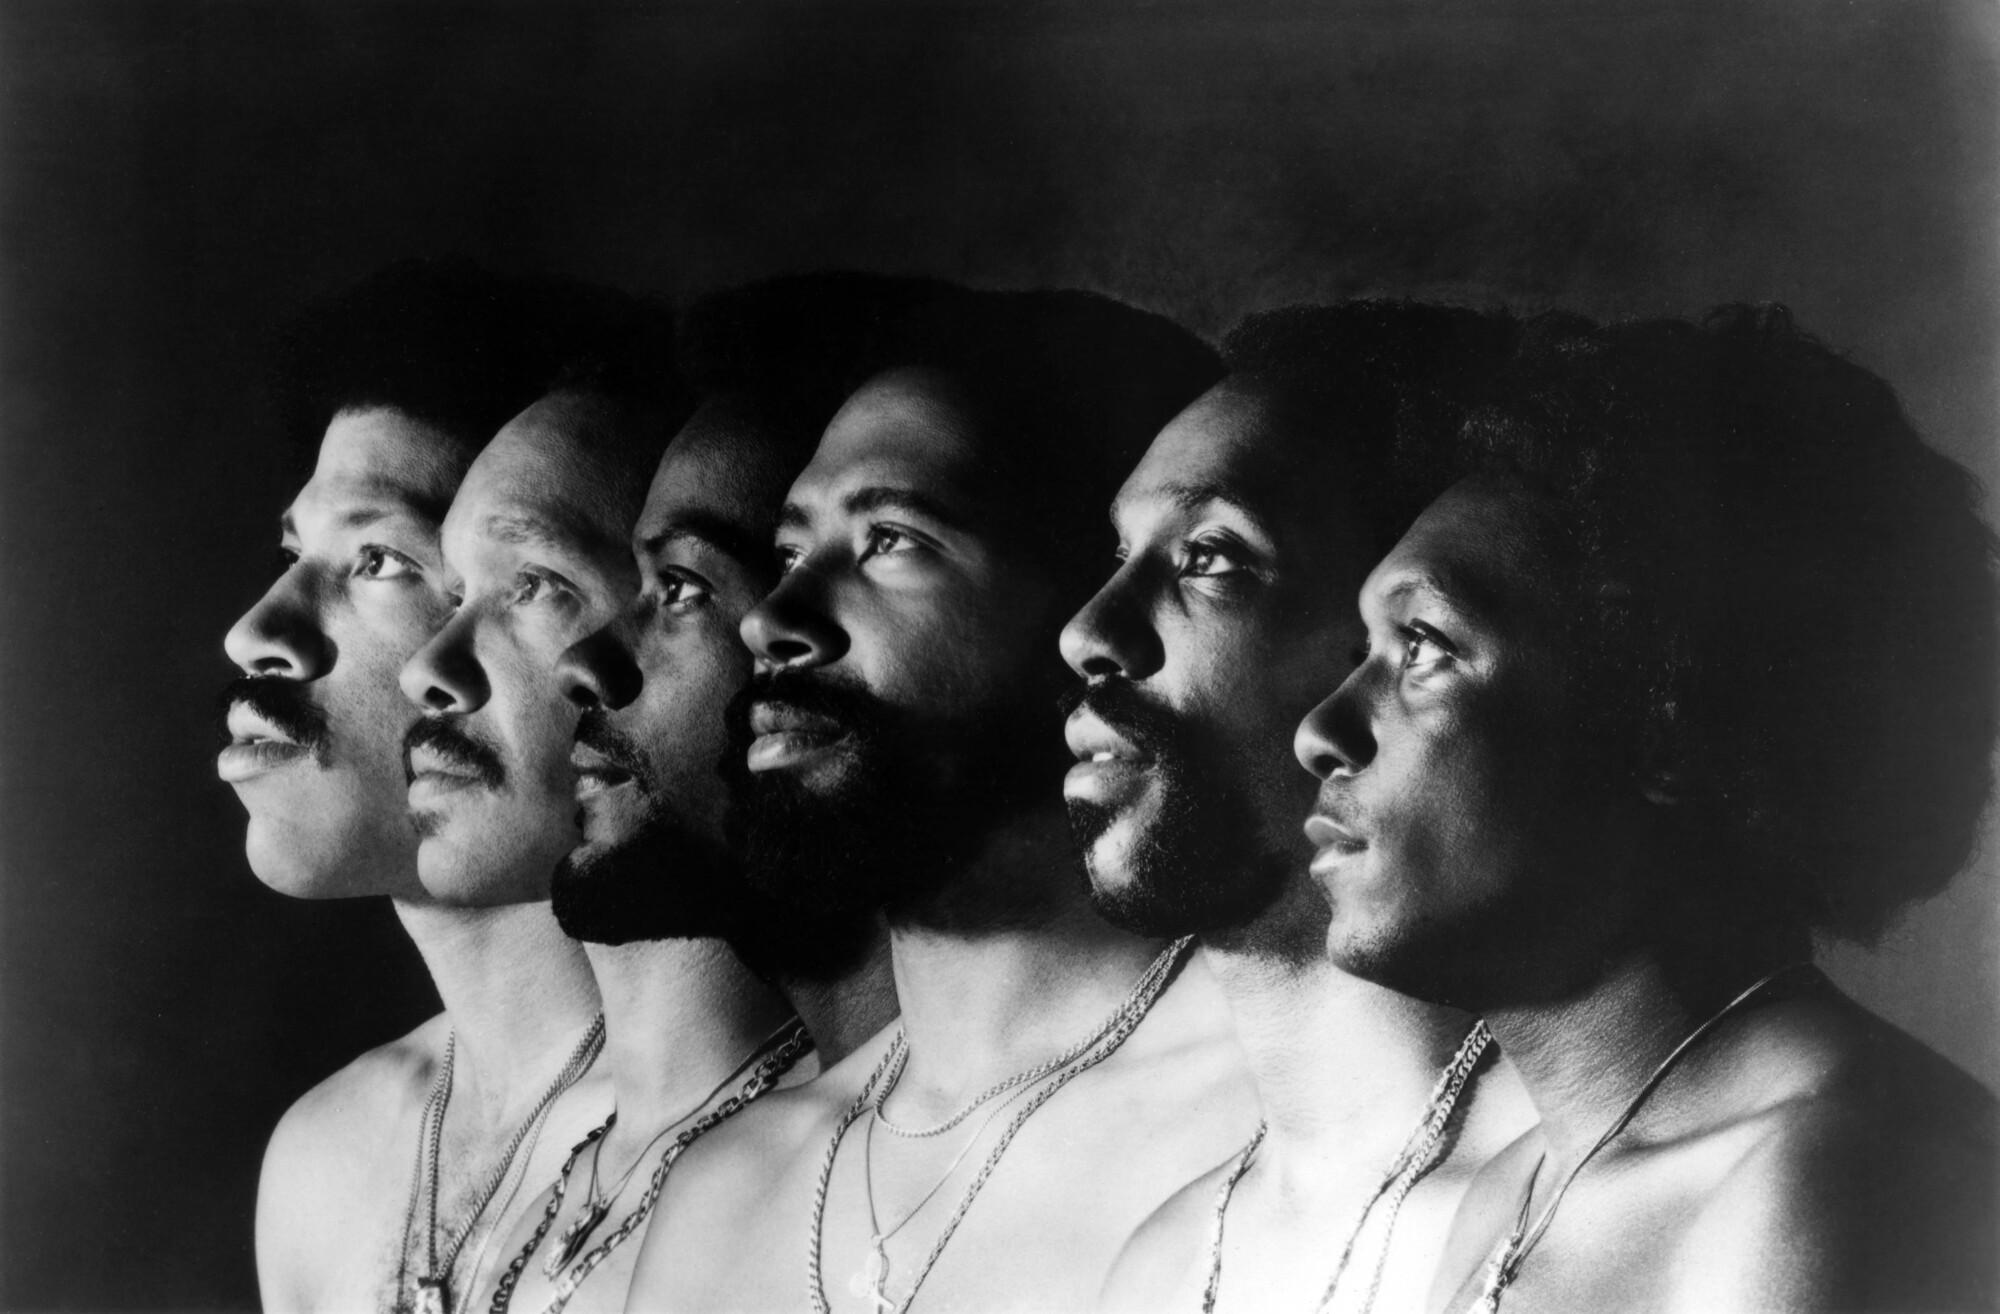 A profile view of Lionel Richie and the other Commodores, standing side by side 